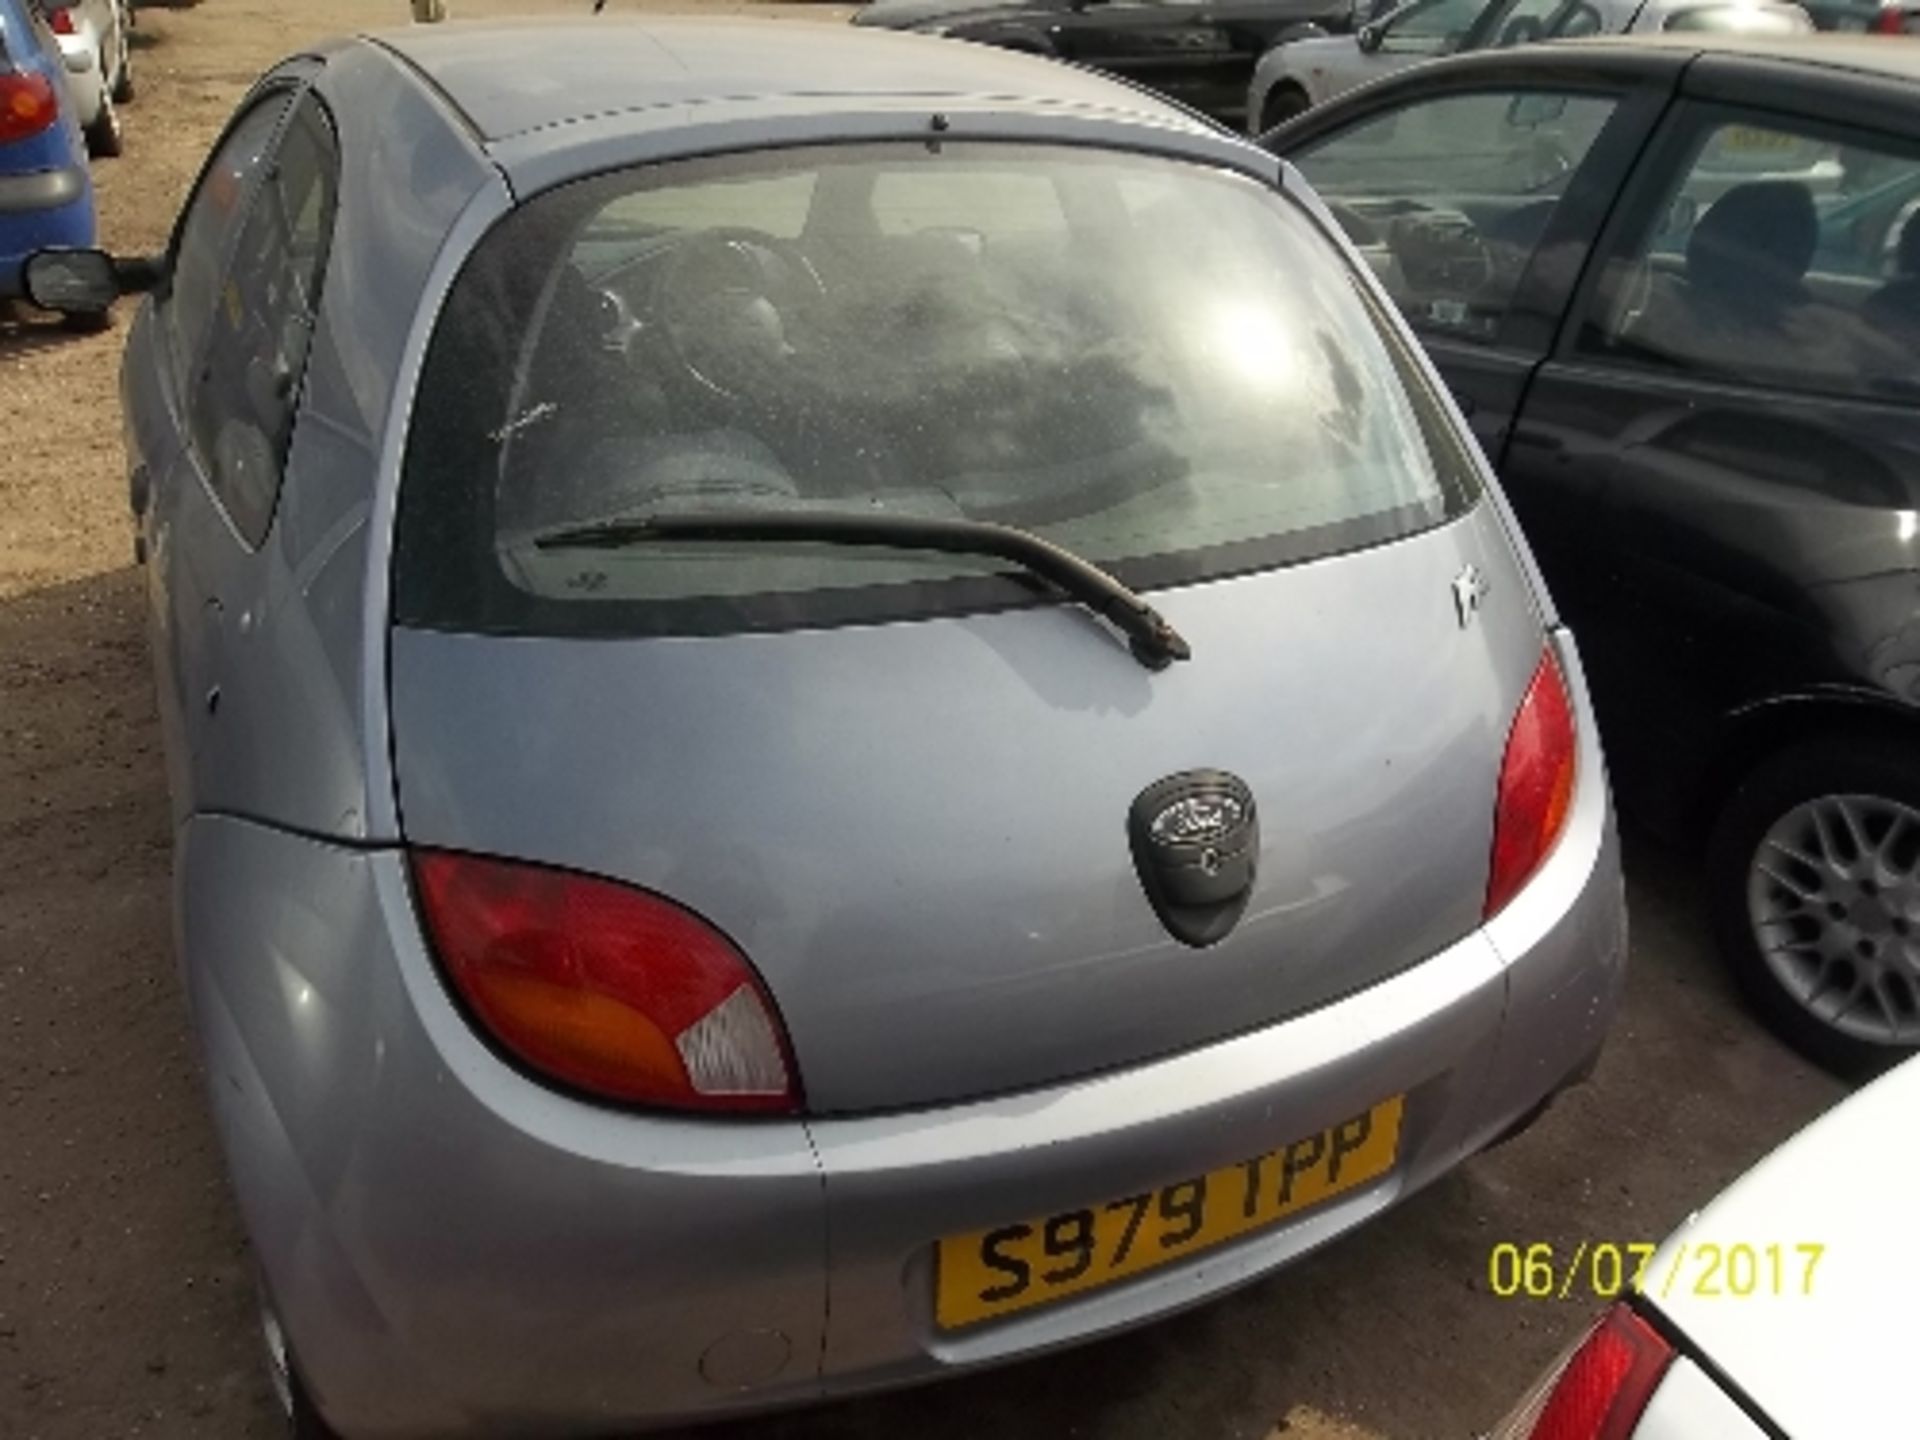 Ford KA 2 - S979 TPP Date of registration: 22.12.1998 1299cc, petrol, manual, blue Odometer reading: - Image 3 of 4